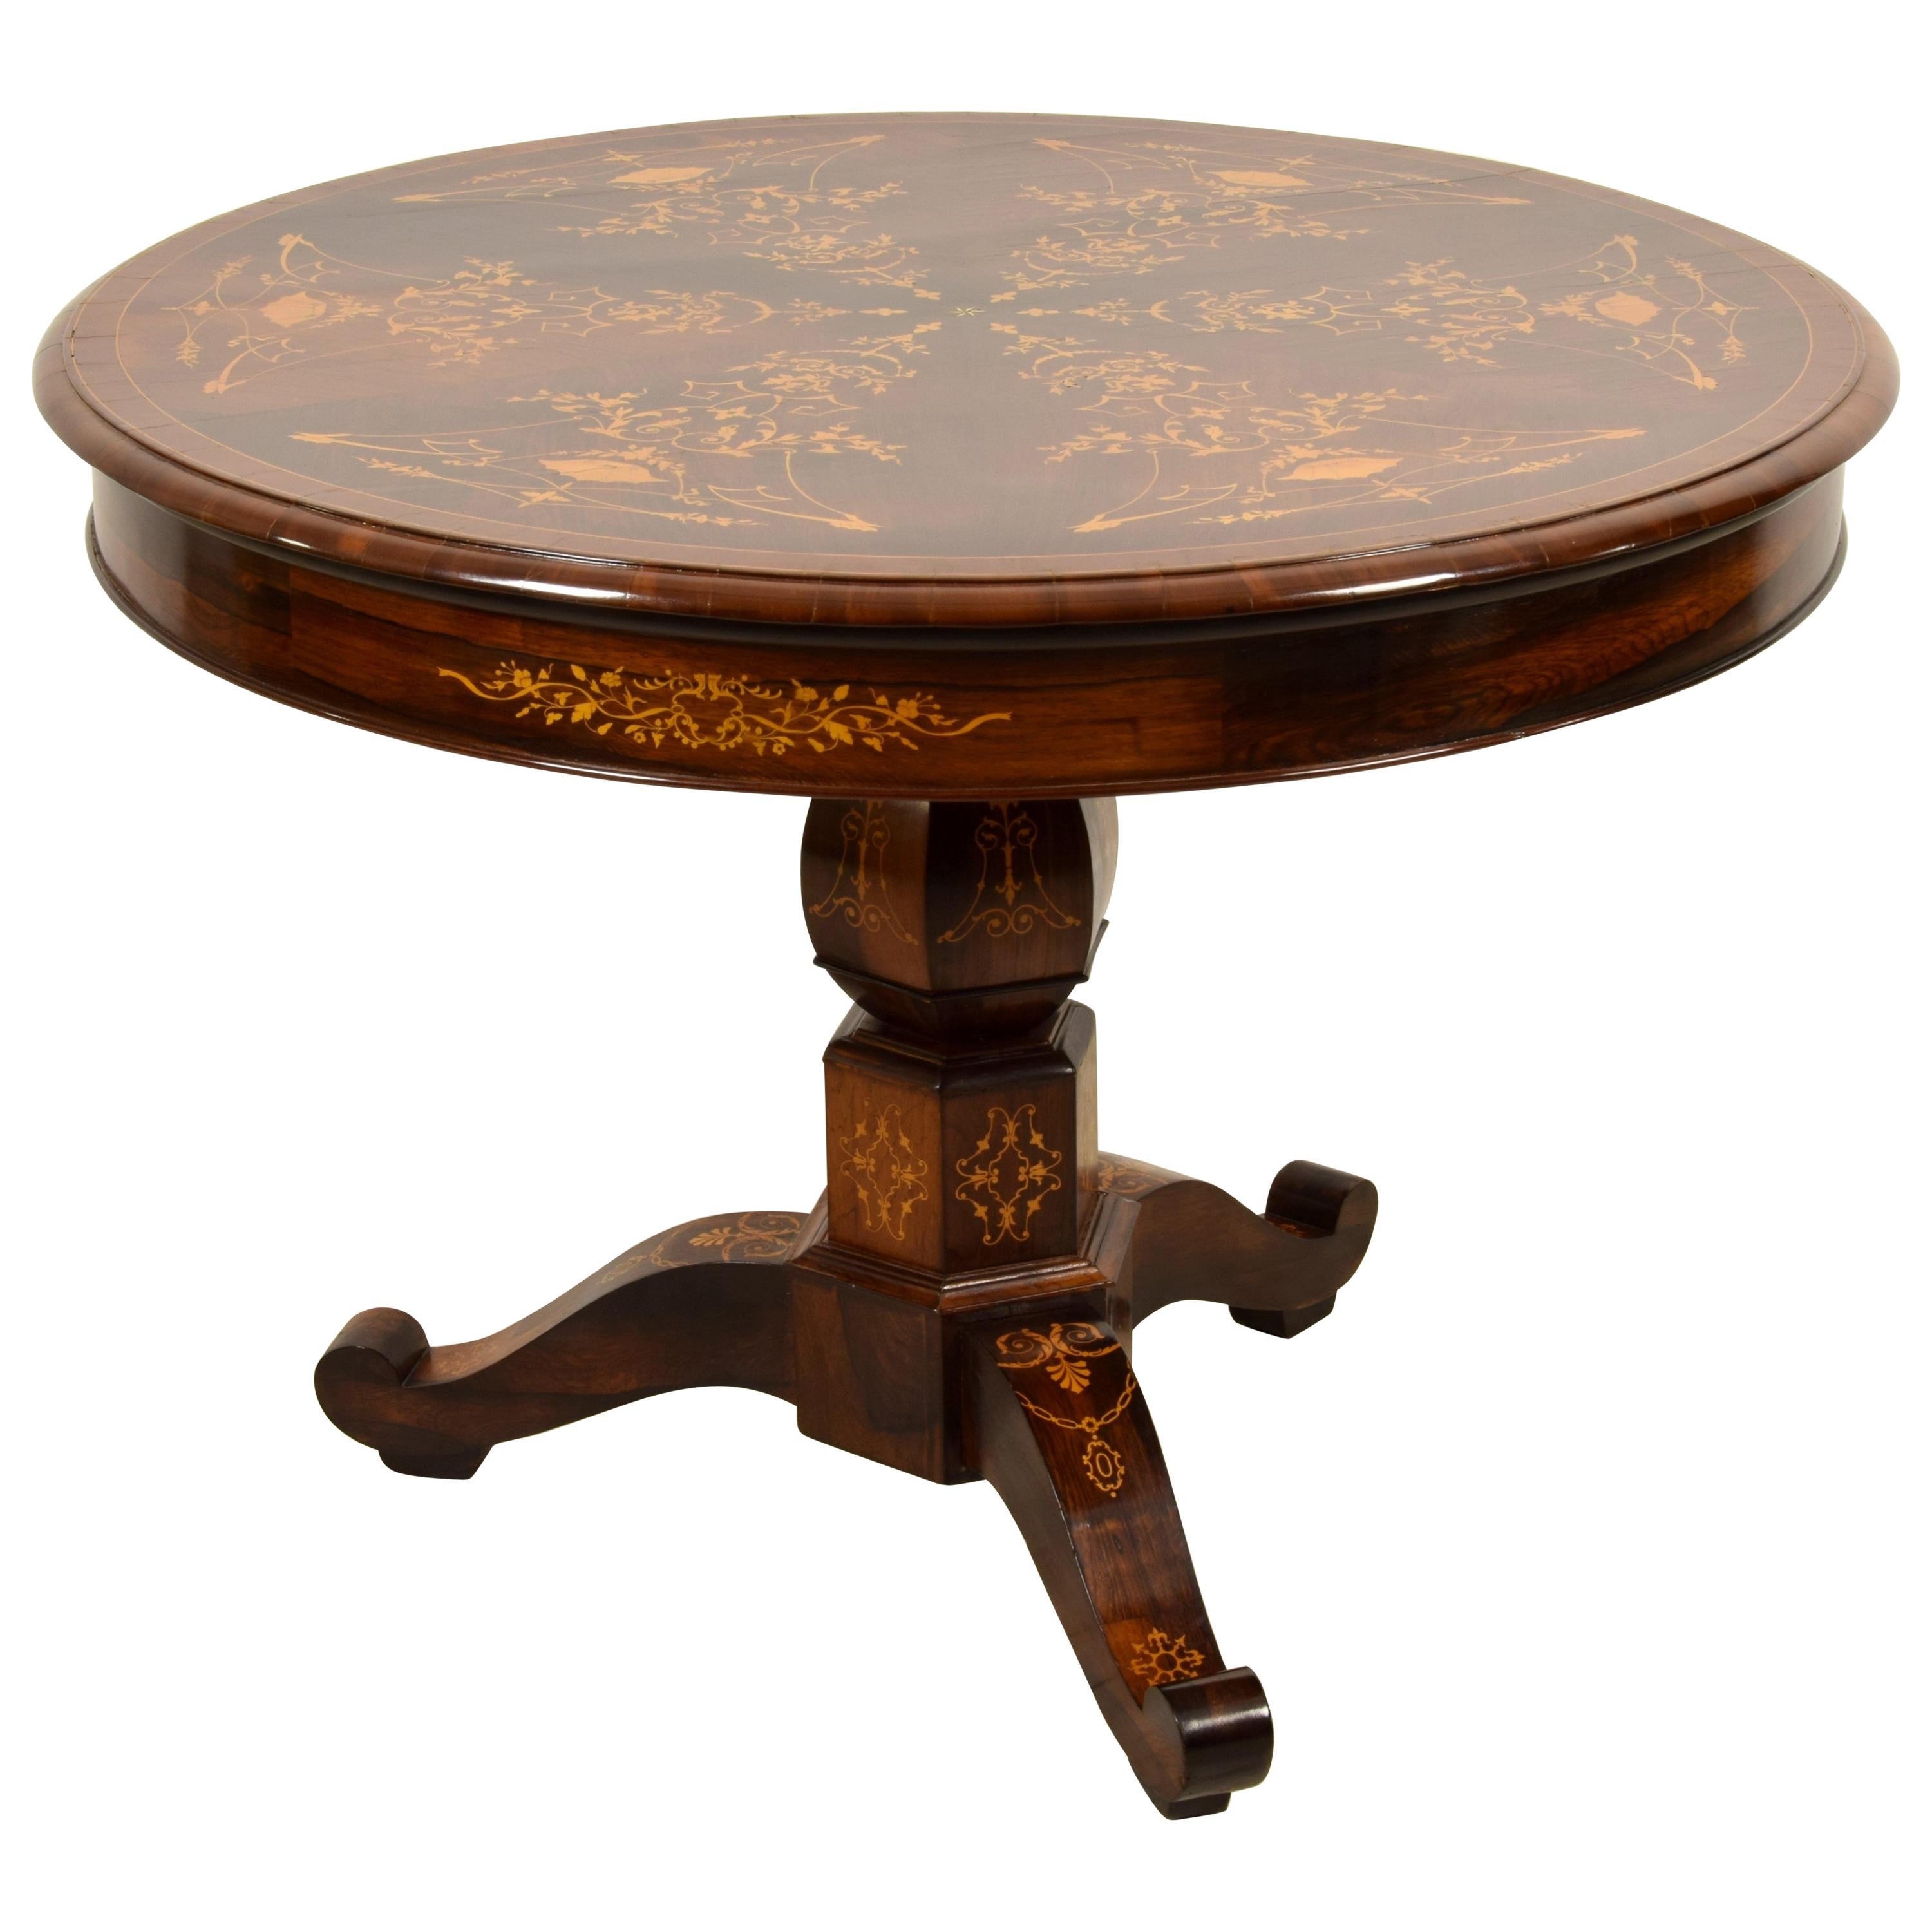 19th Century French Charles X Paved and Inlaid Centre Table with Round Top